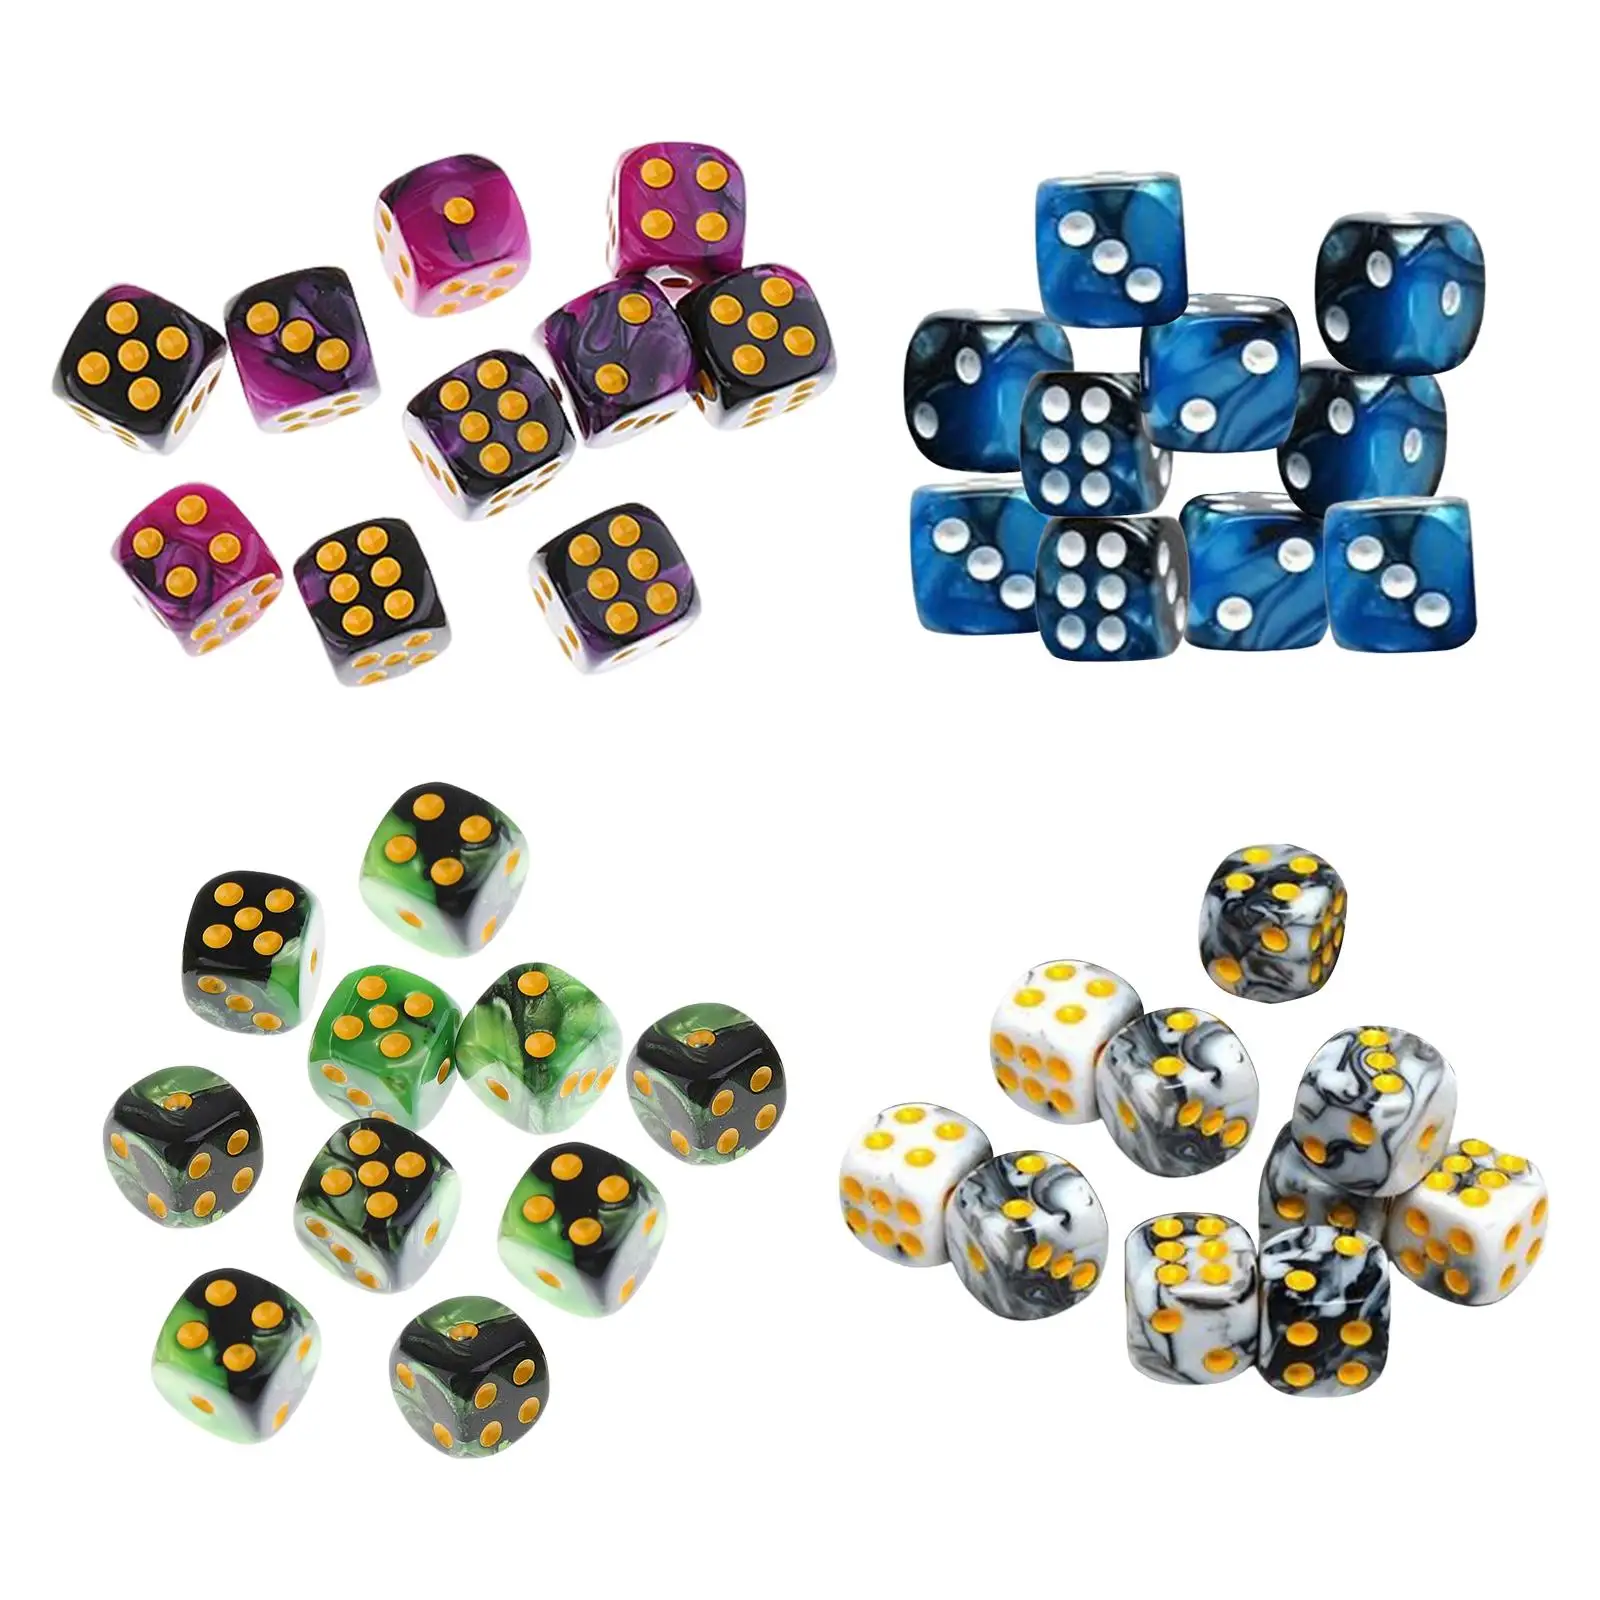 Set of 10 Six Sided Dices Set D6 12mm for DND Role Playing Board Game Math Teaching